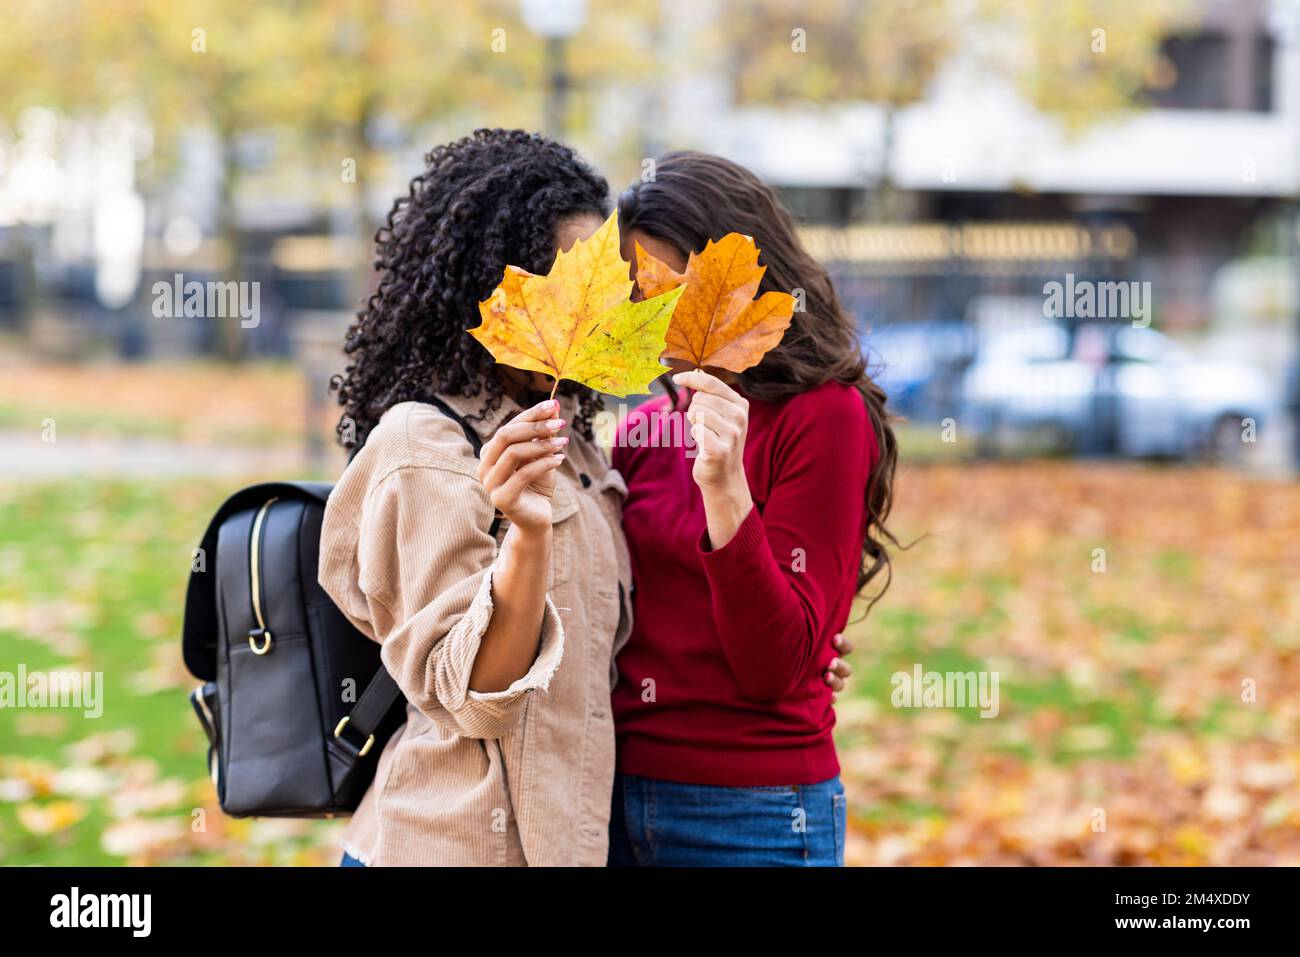 Women hiding faces behind autumn leaves at park Stock Photo